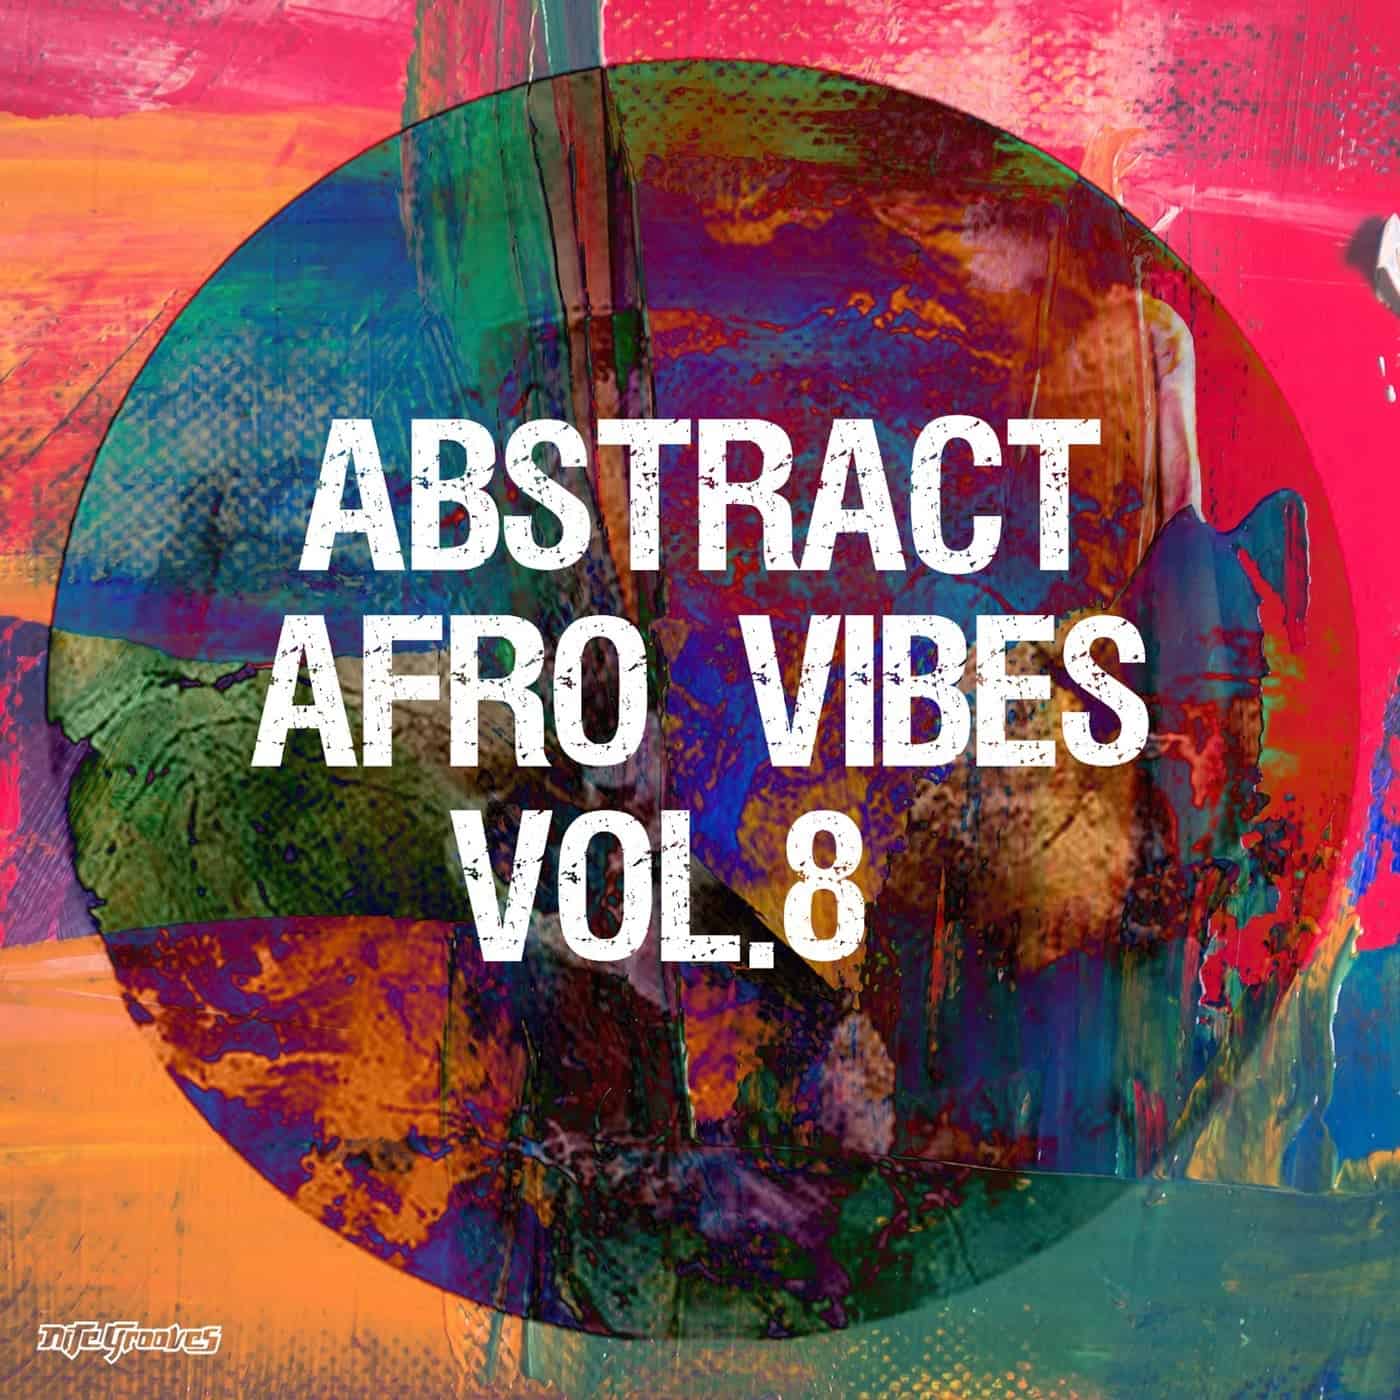 Download VA - Abstract Afro Vibes, Vol. 8 on Electrobuzz